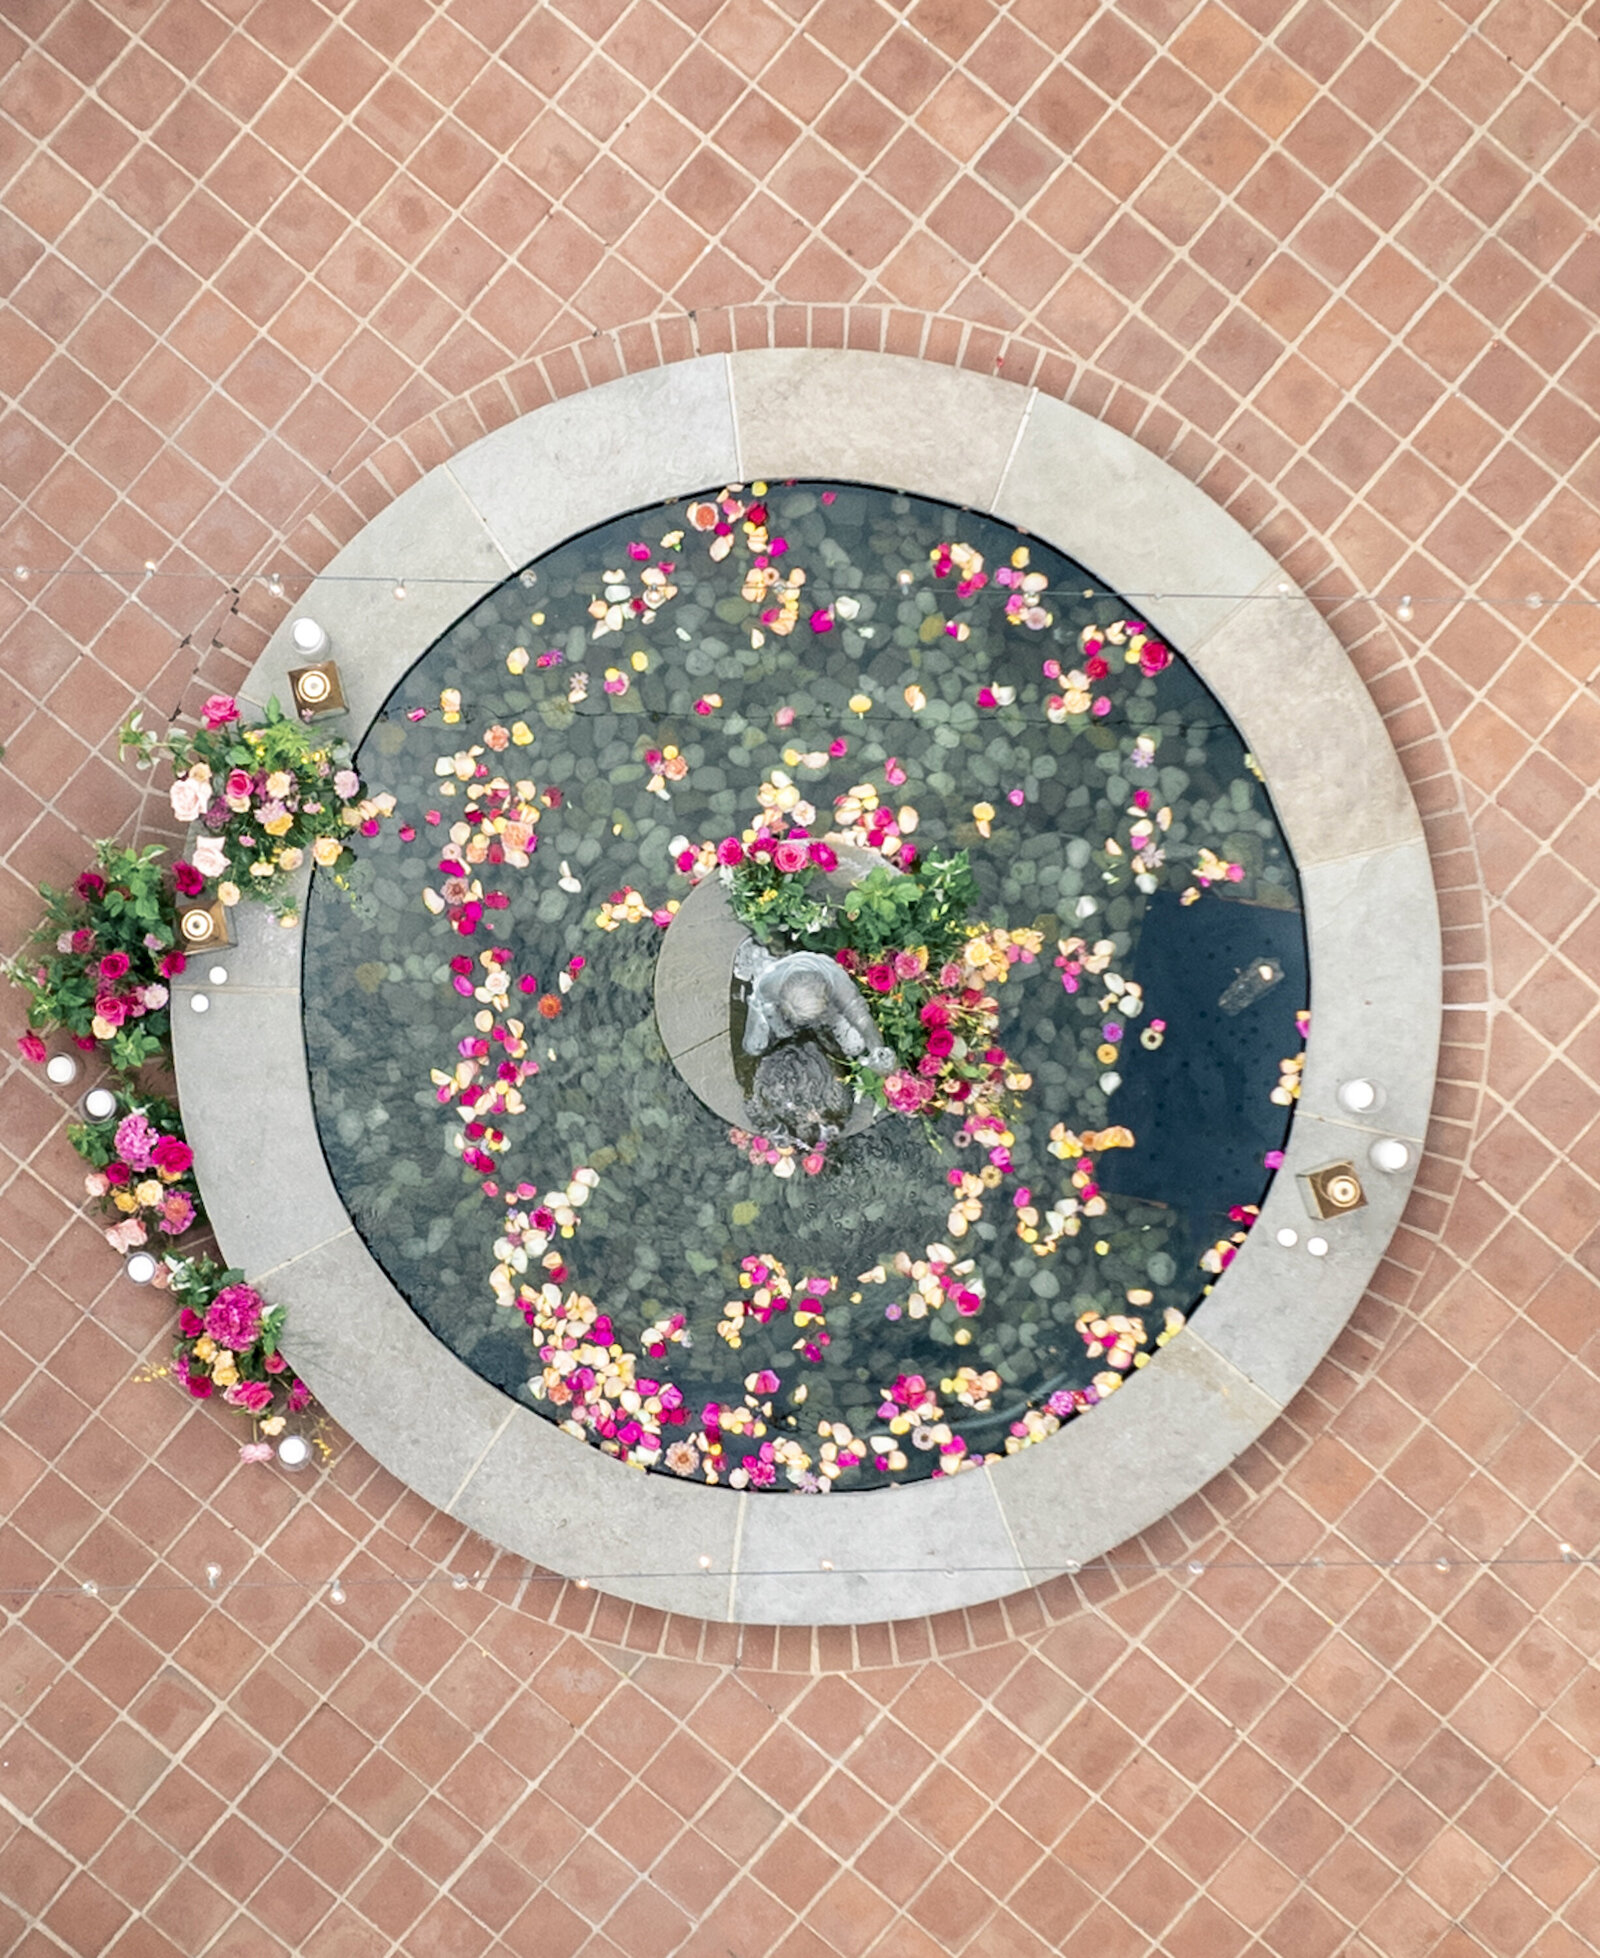 Overhead drone view of fountain at the Gramercy mansion. Bright colored rose petals floating in the water and a floral installation in the middle and side of the fountain with gold lanterns and candles.